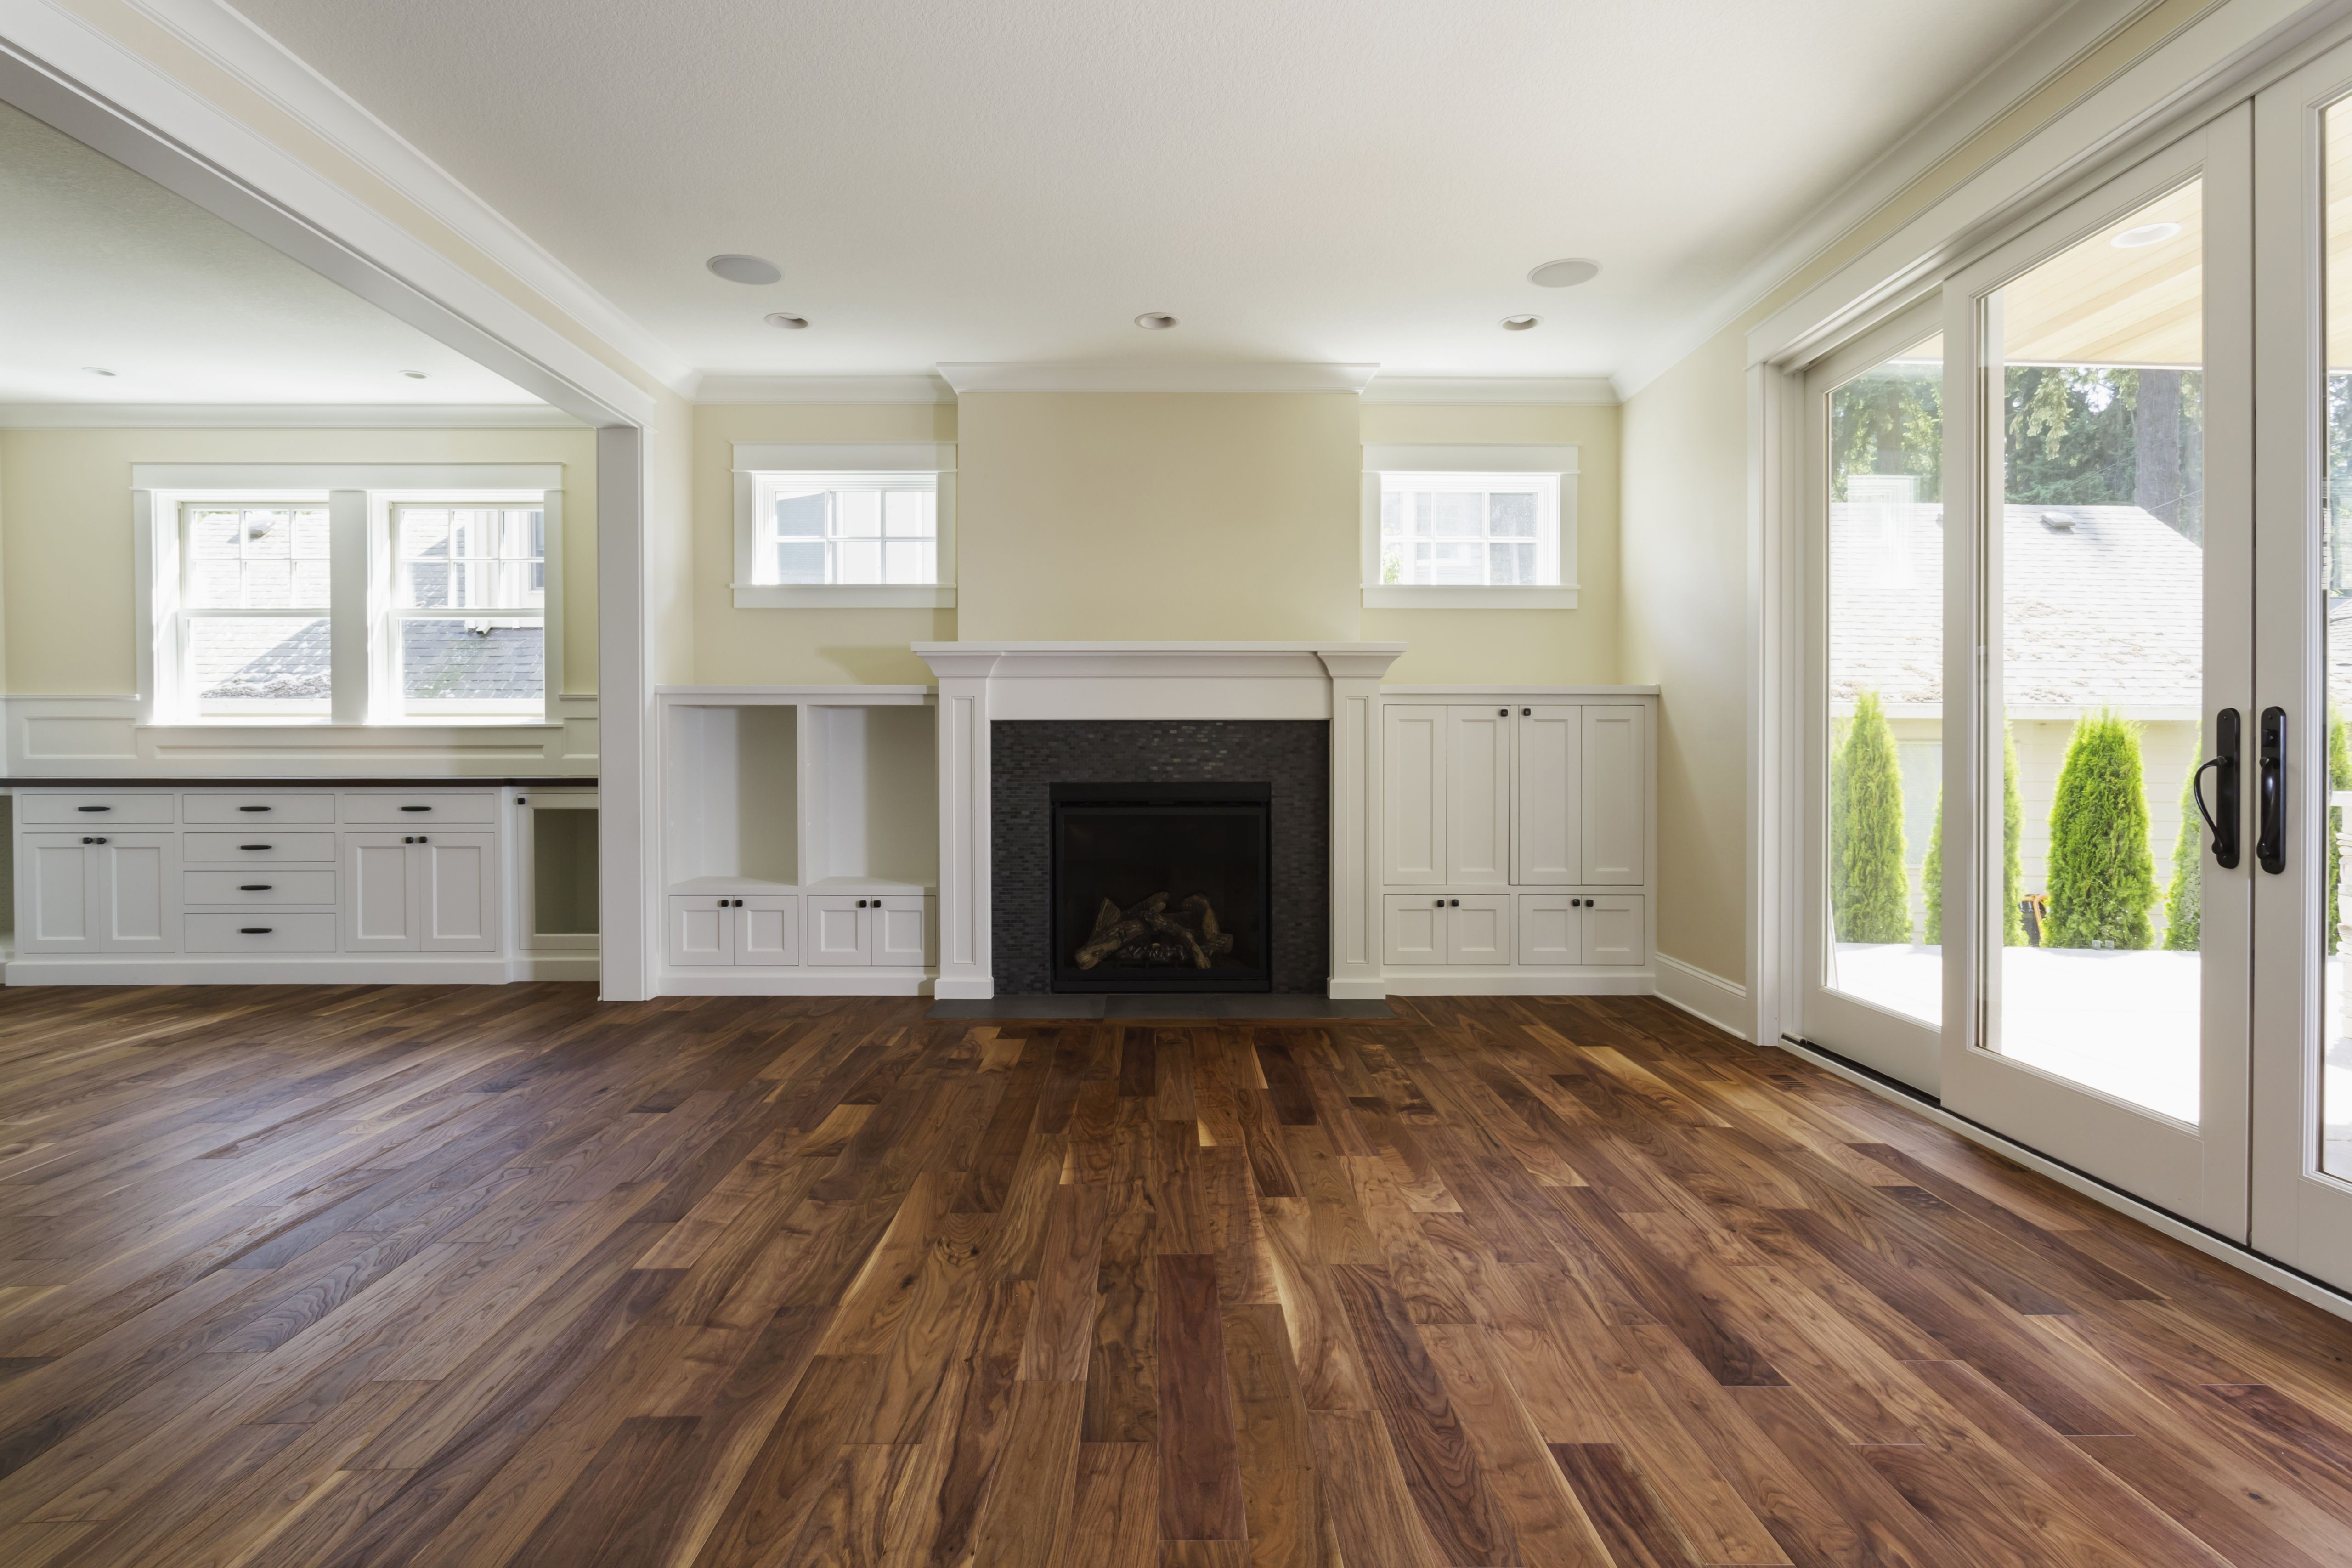 30 Stylish Hardwood Floor Vs Tile that Looks Like Wood 2024 free download hardwood floor vs tile that looks like wood of the pros and cons of prefinished hardwood flooring intended for fireplace and built in shelves in living room 482143011 57bef8e33df78cc16e03539